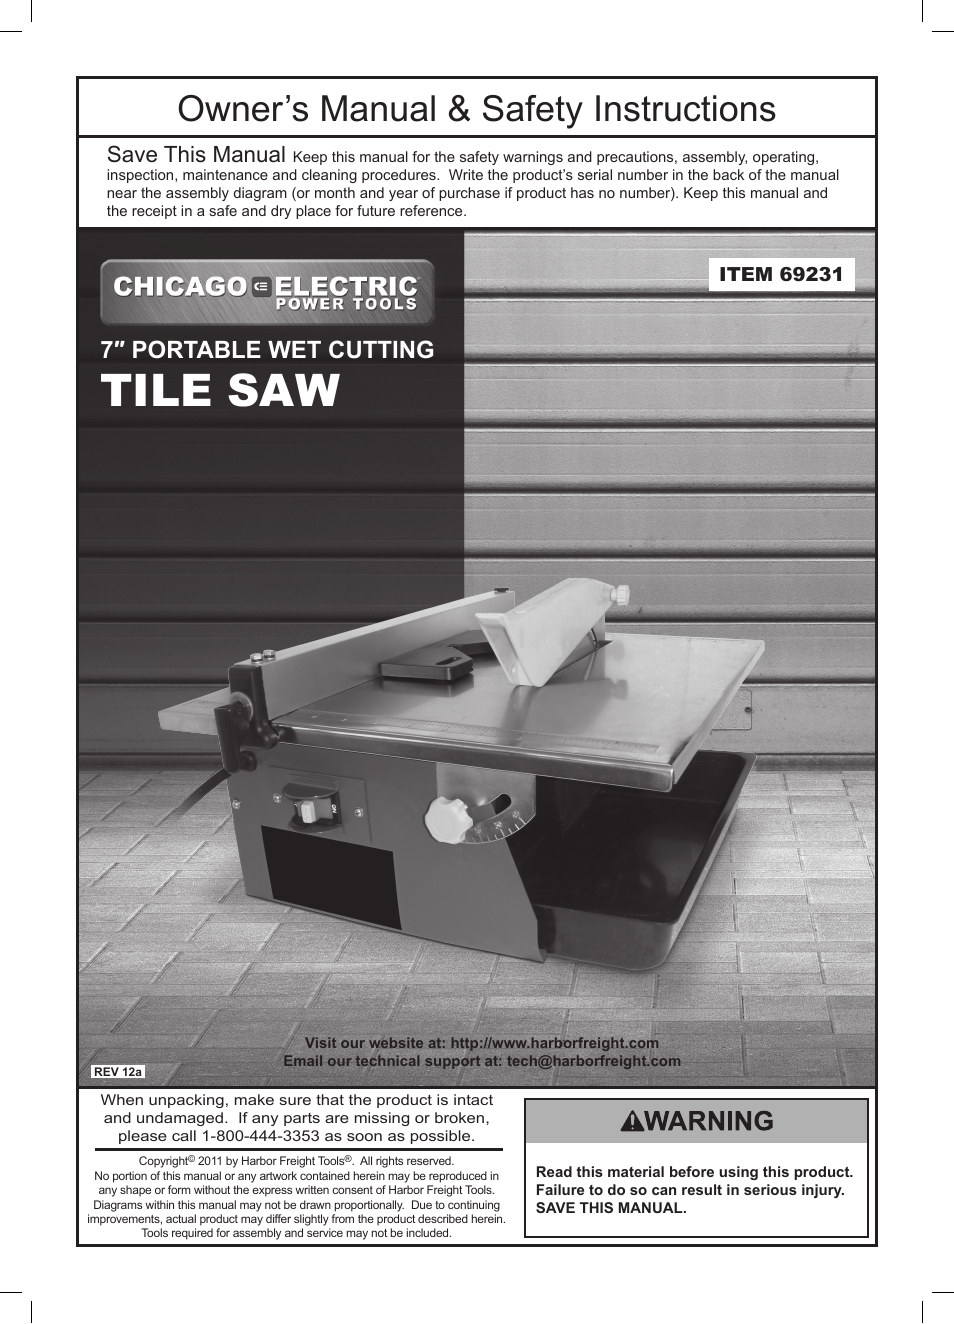 Chicago Electric Power Tools / Tile Saw 69231 User Manual | 16 pages